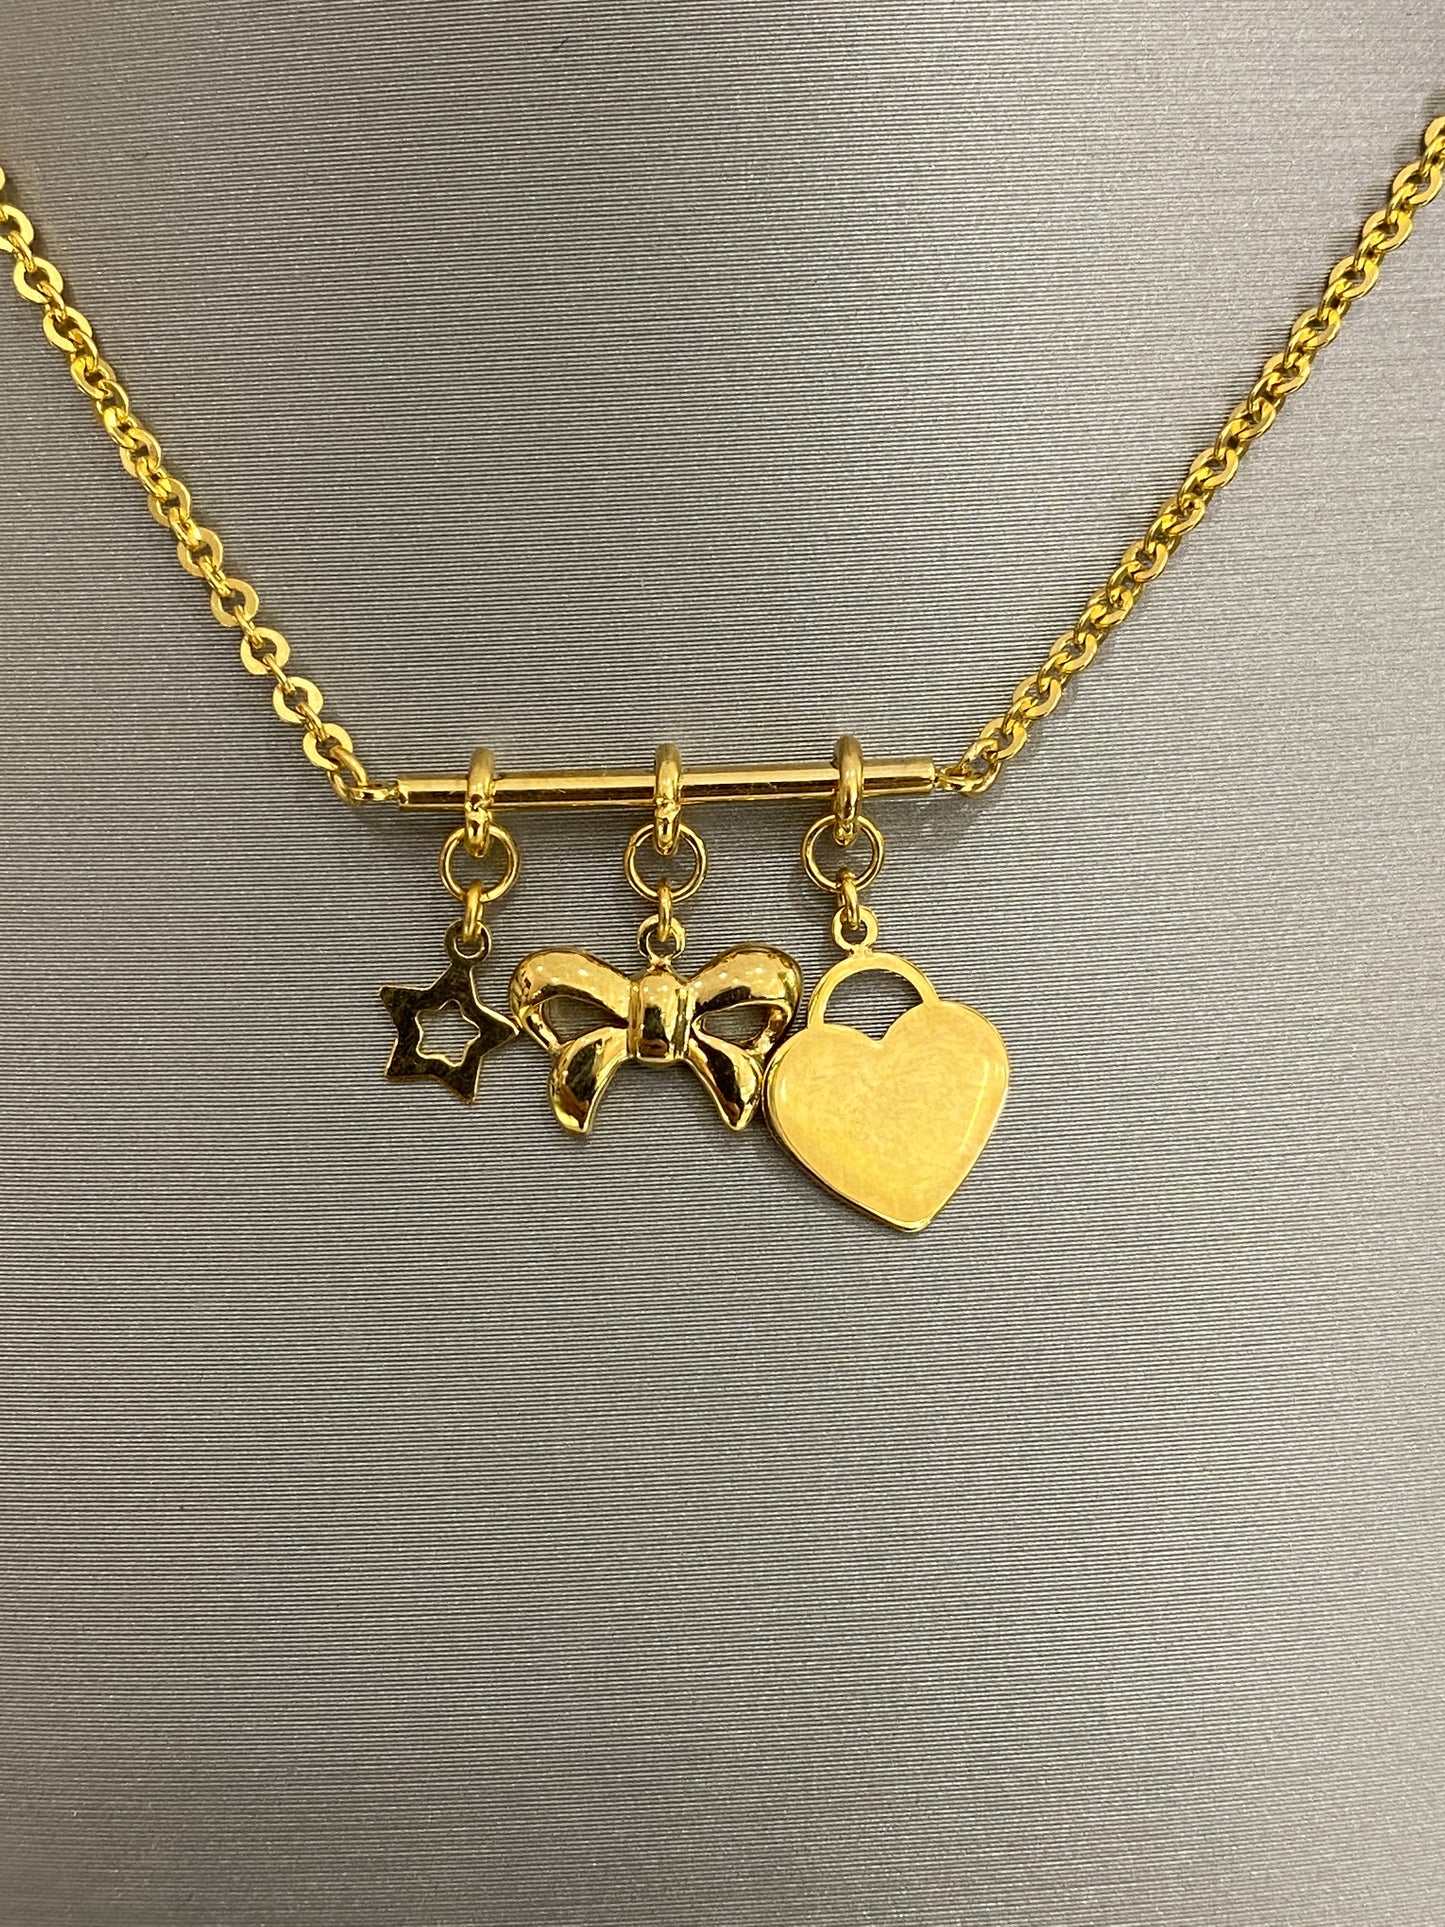 21k Gold Charm Necklace